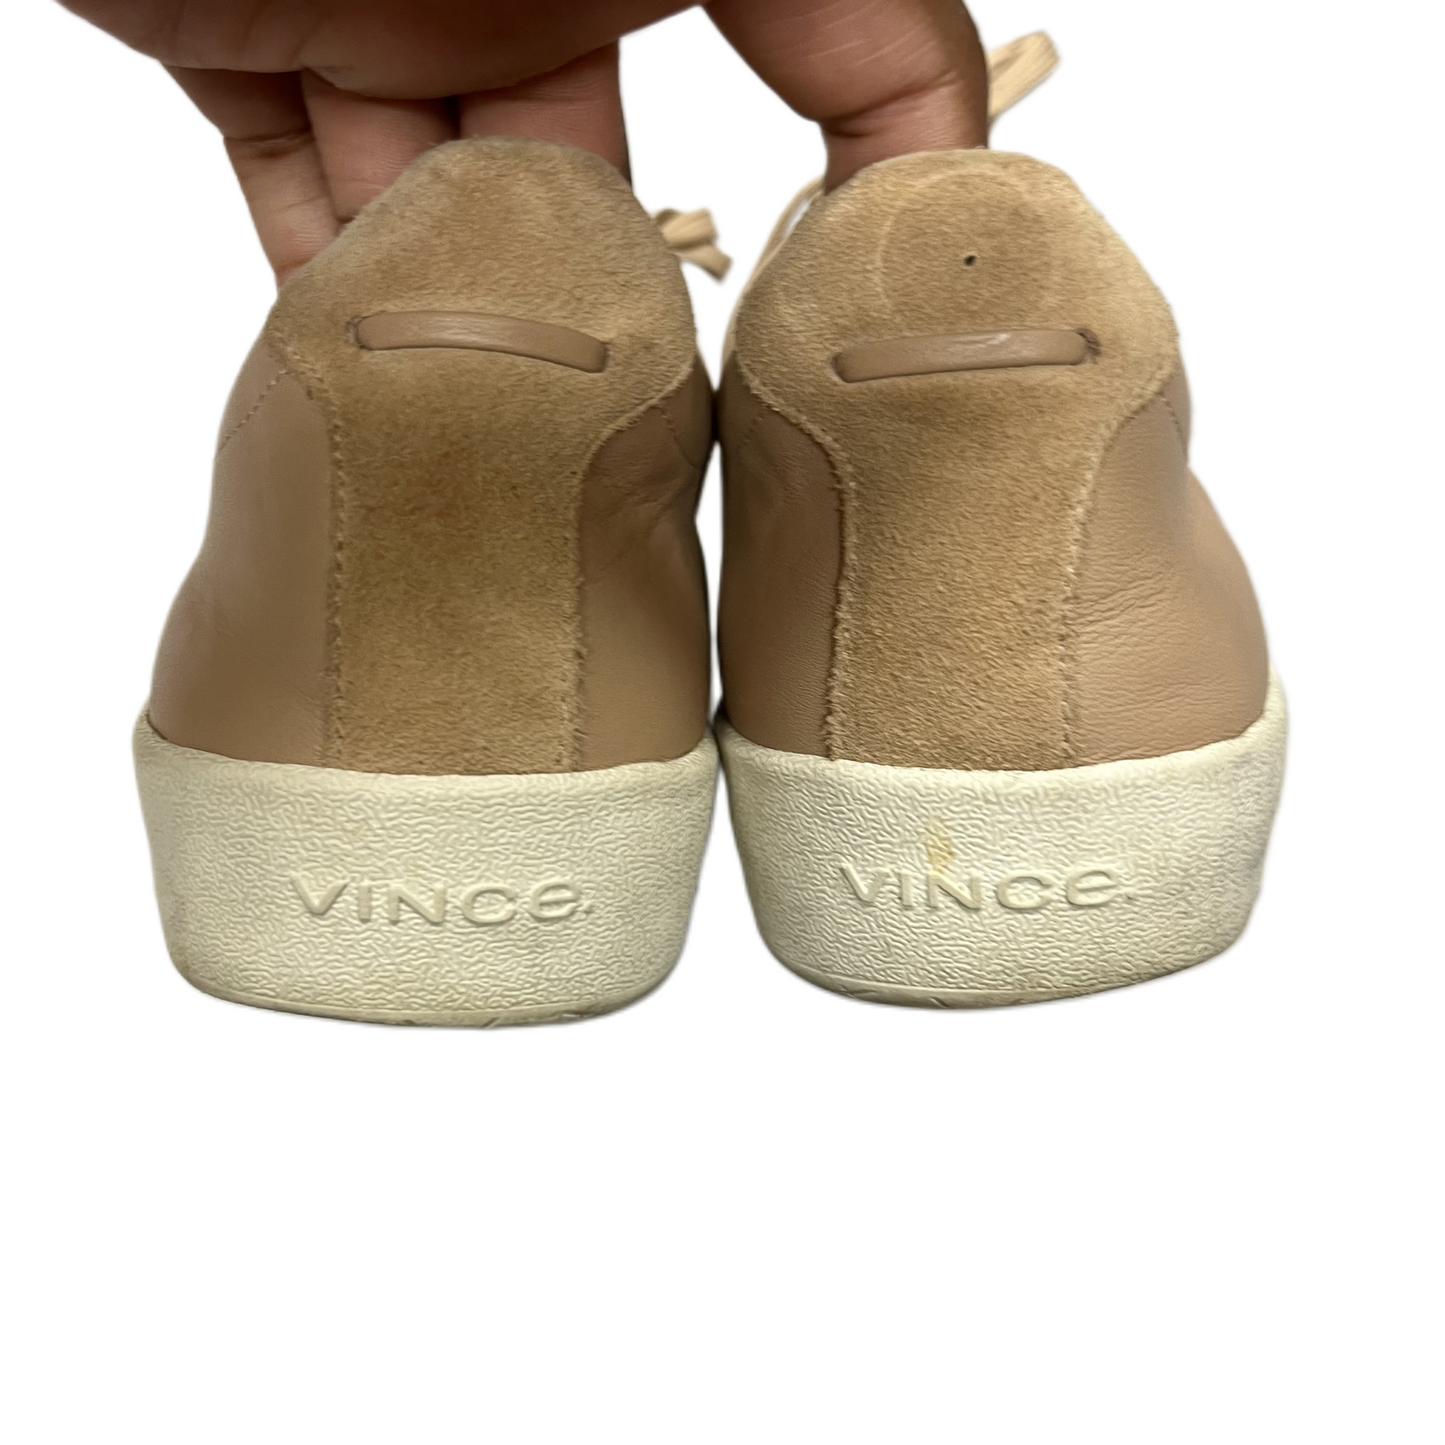 Tan Shoes Sneakers By Vince, Size: 7.5